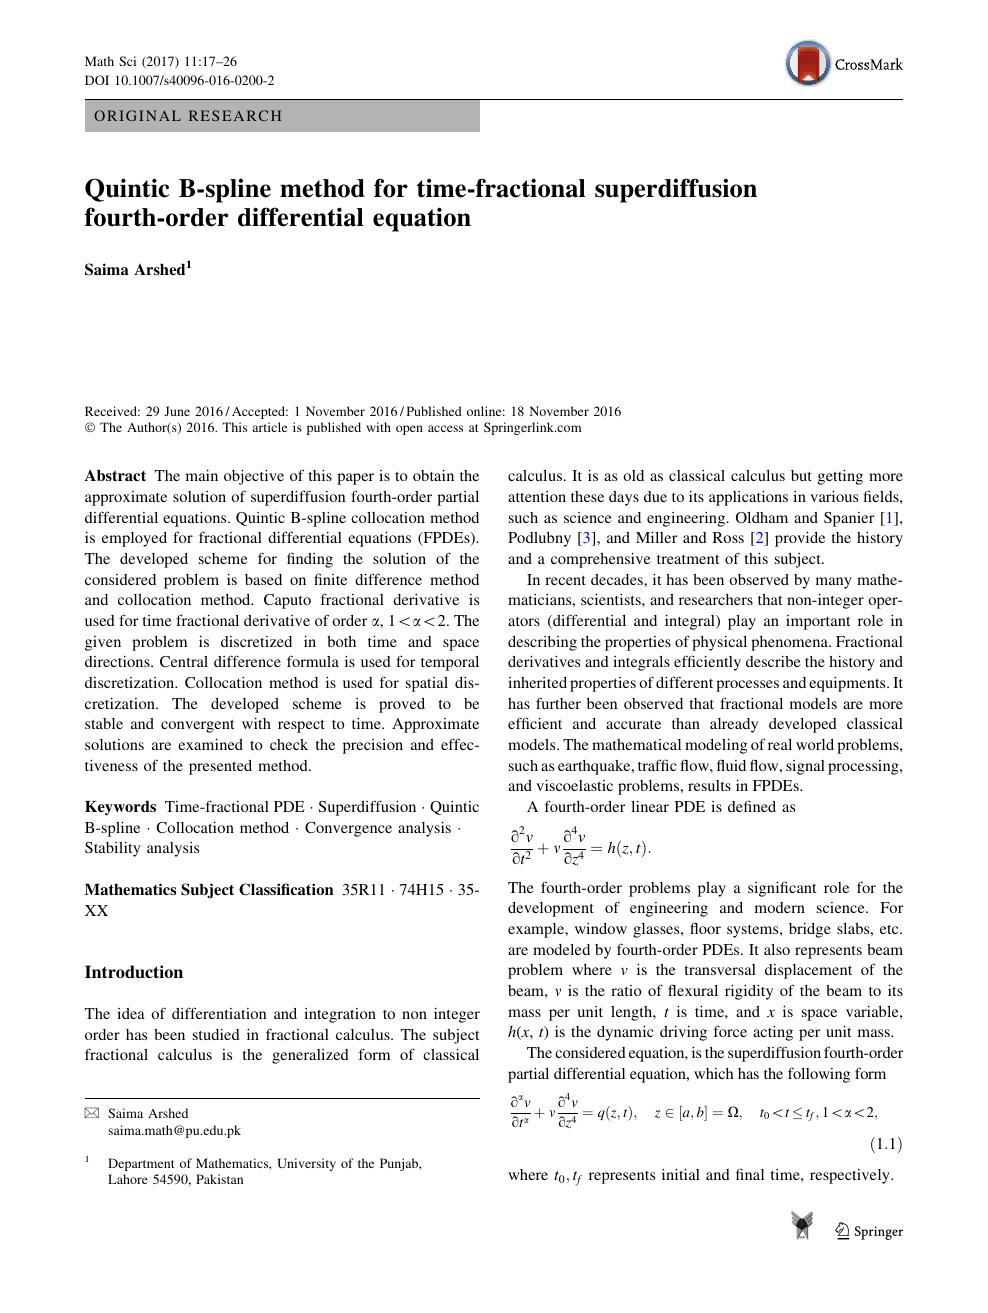 Quintic B Spline Method For Time Fractional Superdiffusion Fourth Order Differential Equation Topic Of Research Paper In Mathematics Download Scholarly Article Pdf And Read For Free On Cyberleninka Open Science Hub